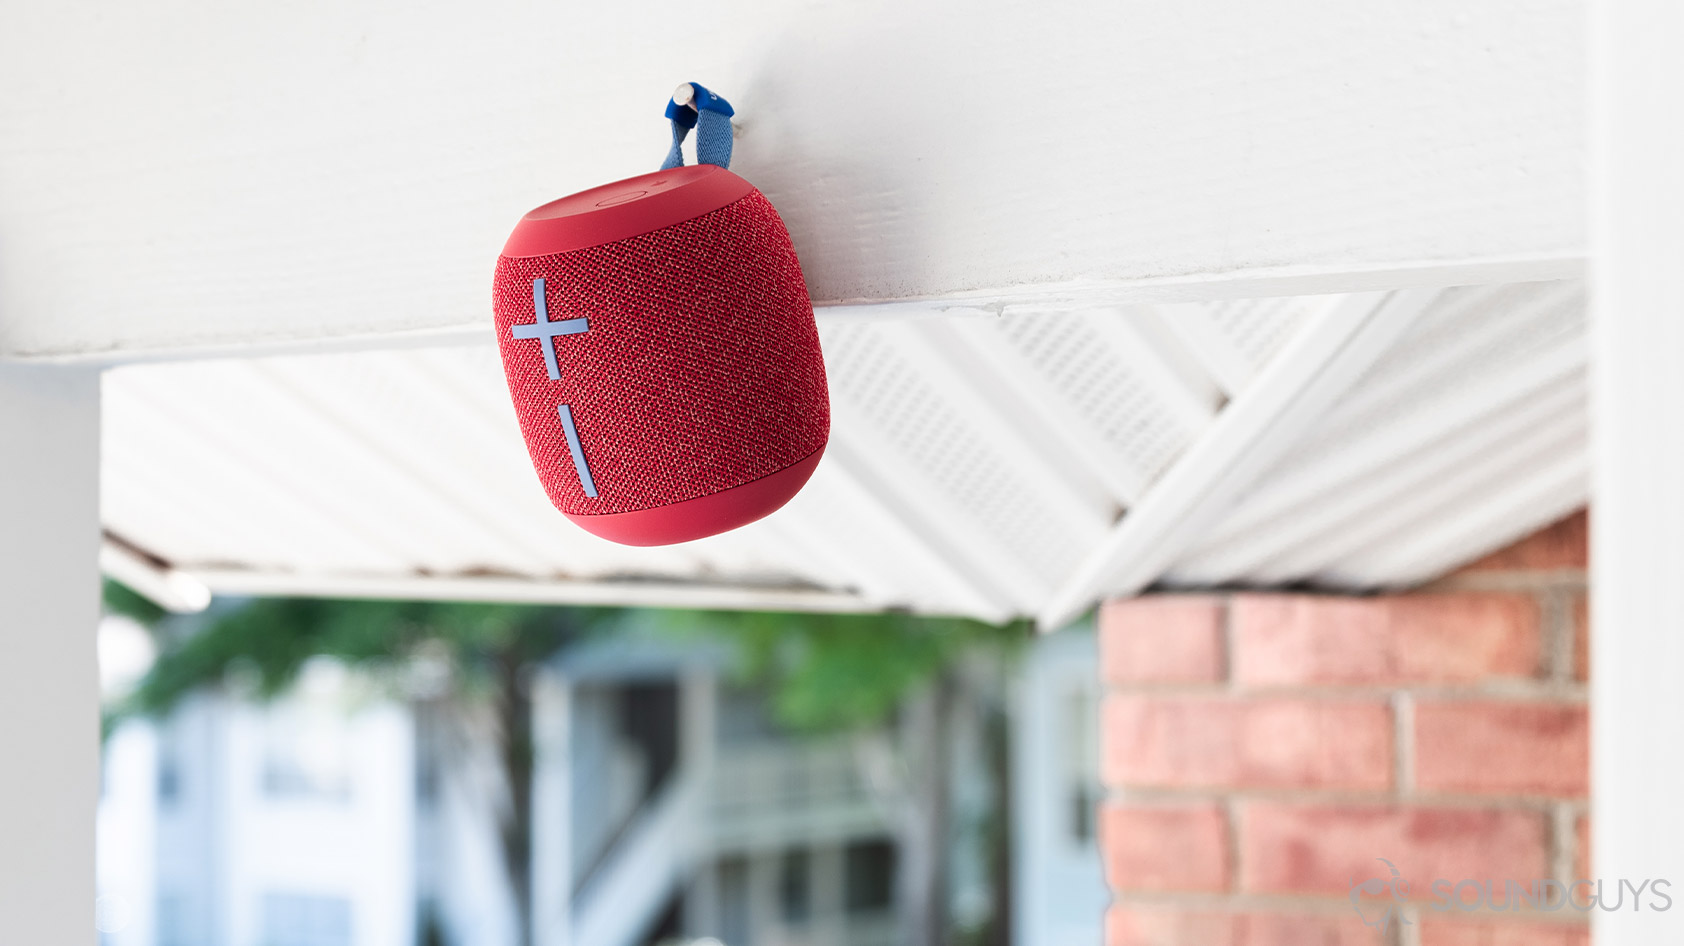 The UE Wonderboom 2 hanging from a nail on a balcony.